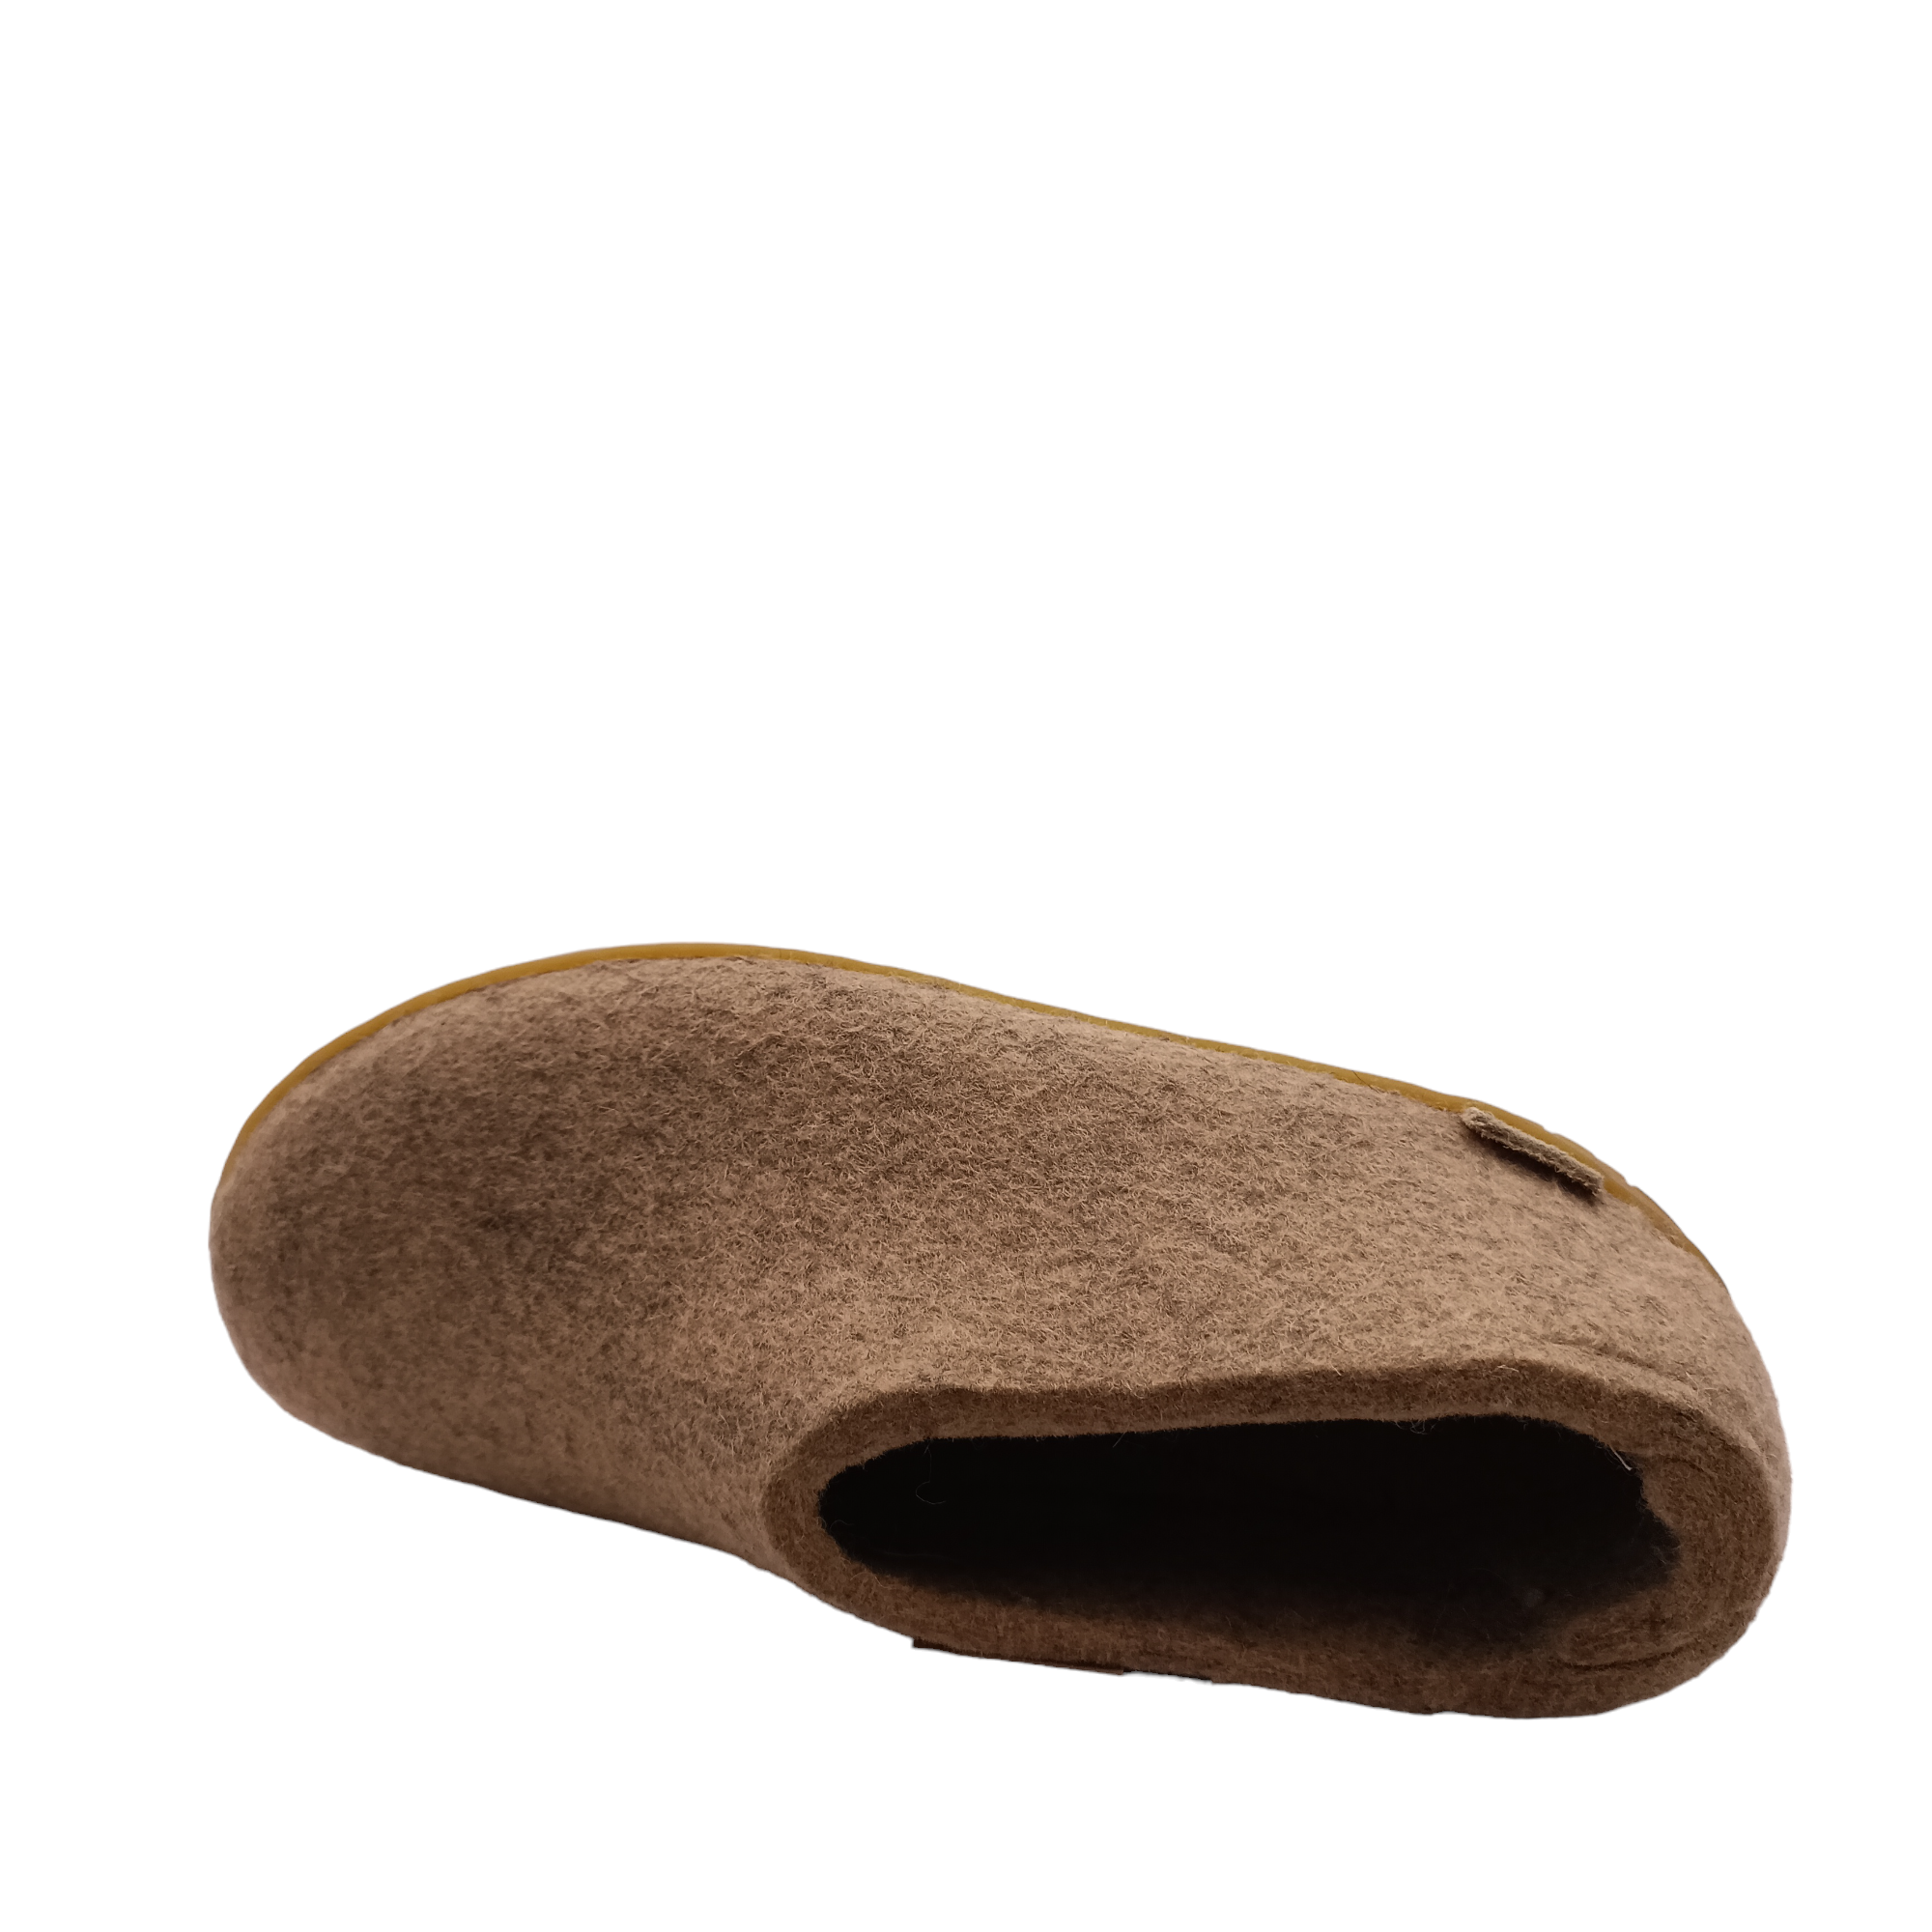 Top view of sand coloured felt wool Glerup shoe or slipper with natural rubber sole. Shop slippers online and instore with shoe&me Mount Maunganui.